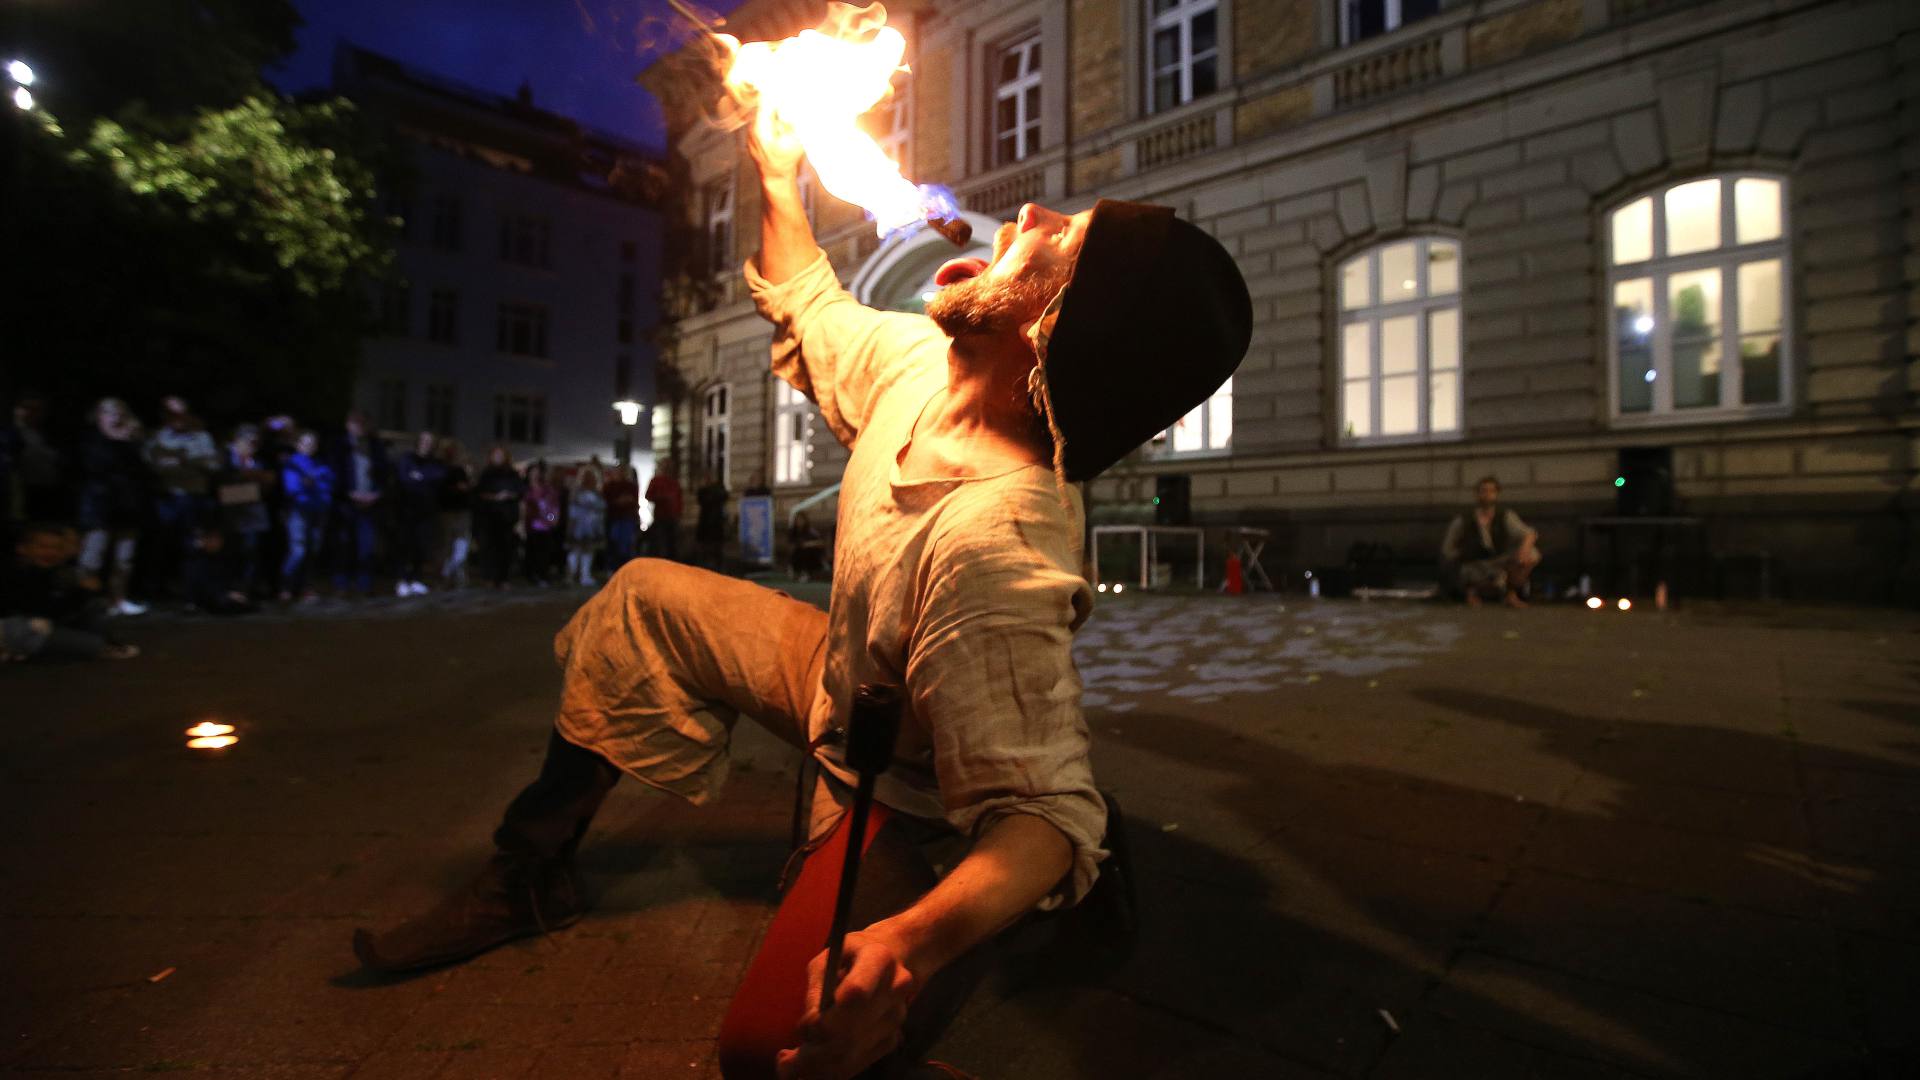 A fire-eater in ancient clothing kneels in front of the Alte Post, holding a flaming torch in front of his mouth